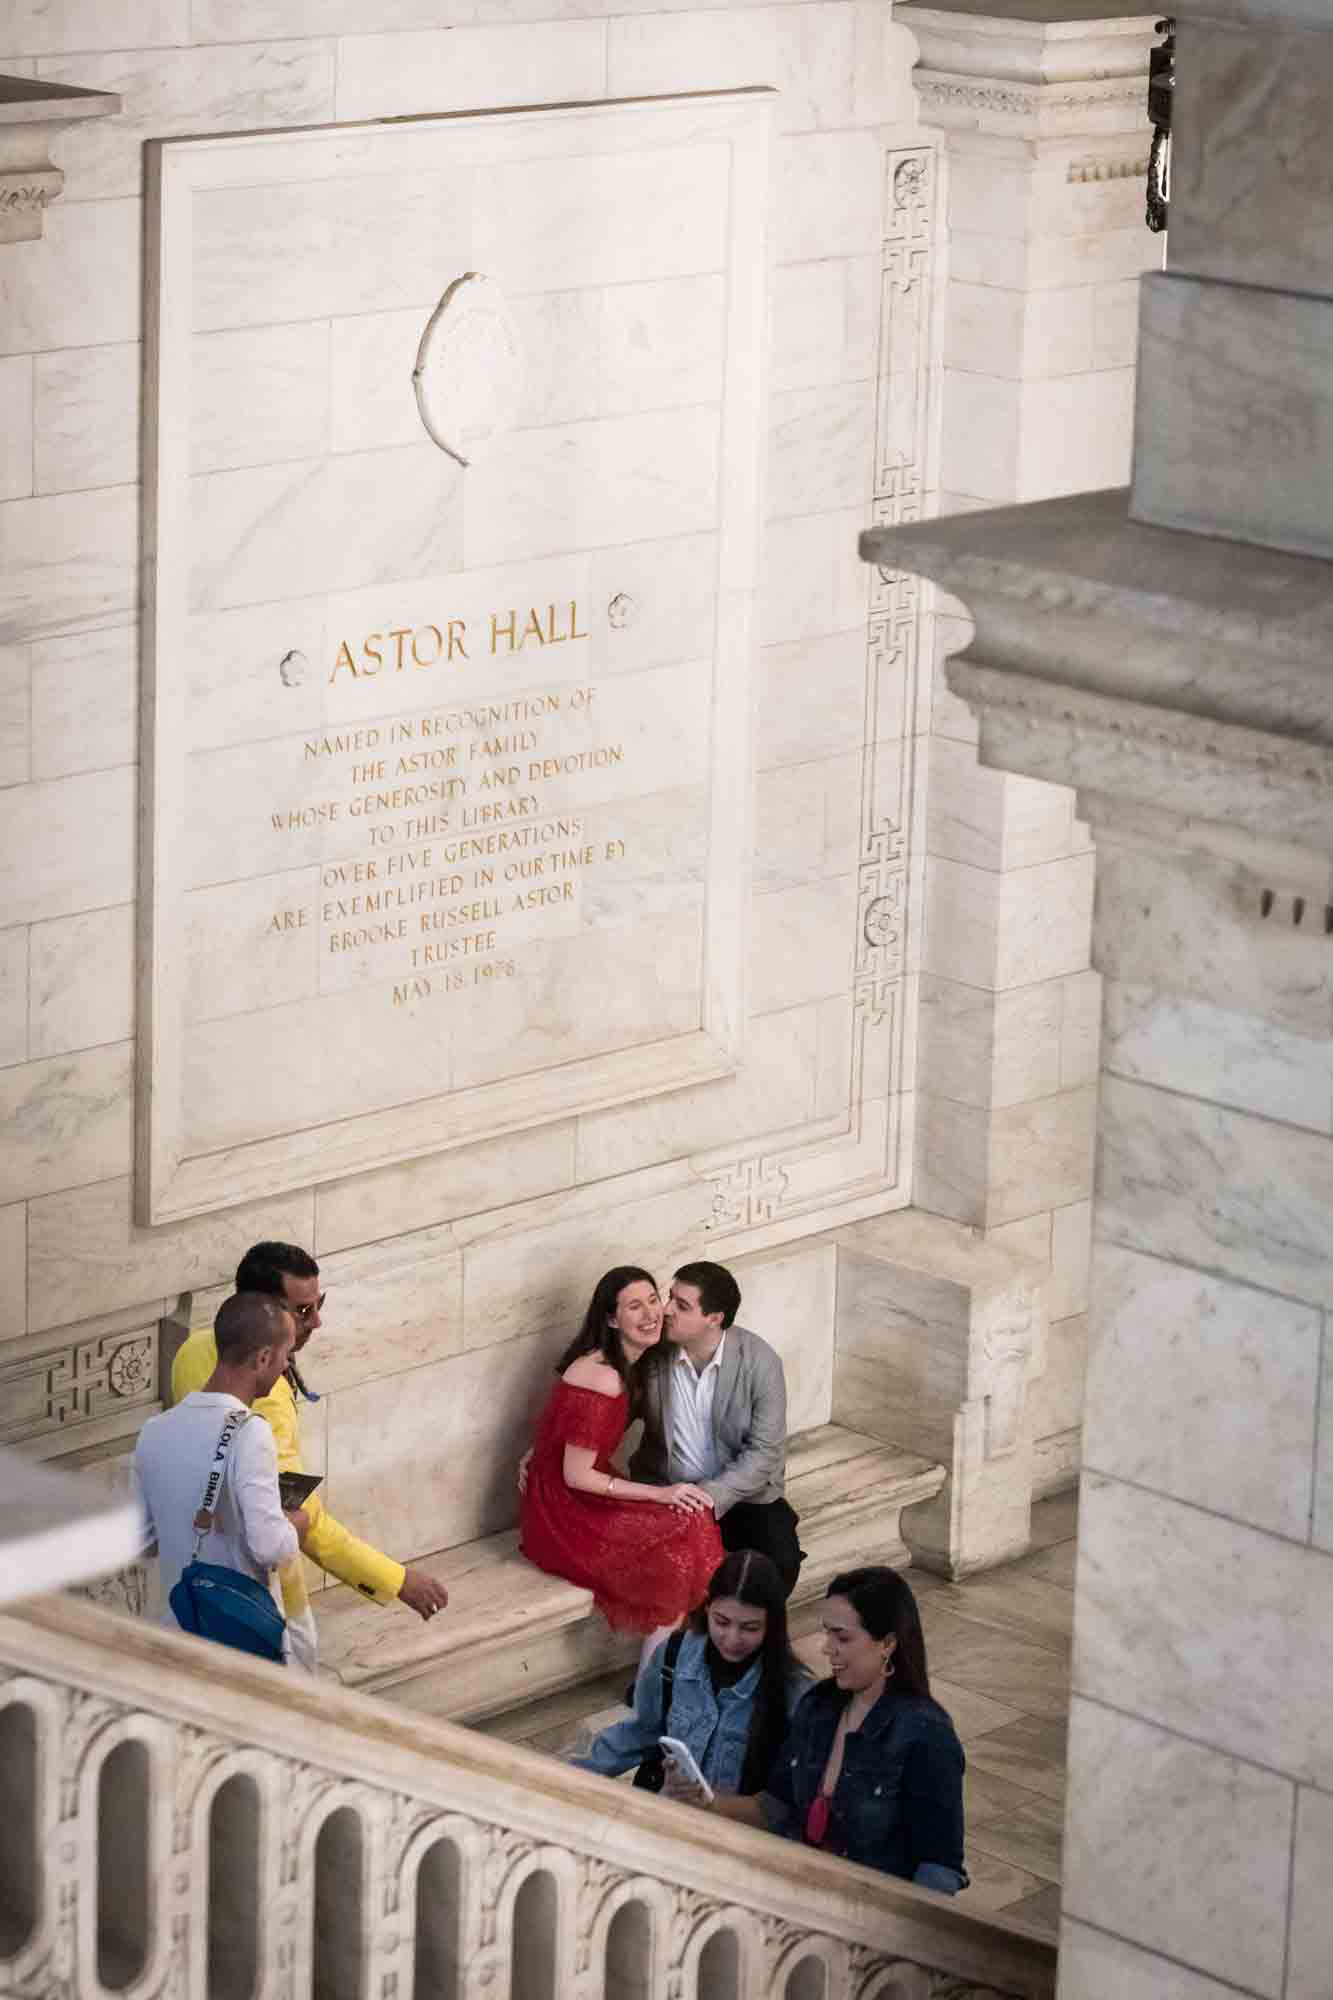 Couple kissing on stone bench in staircase with patrons walking past during a New York Public Library surprise proposal